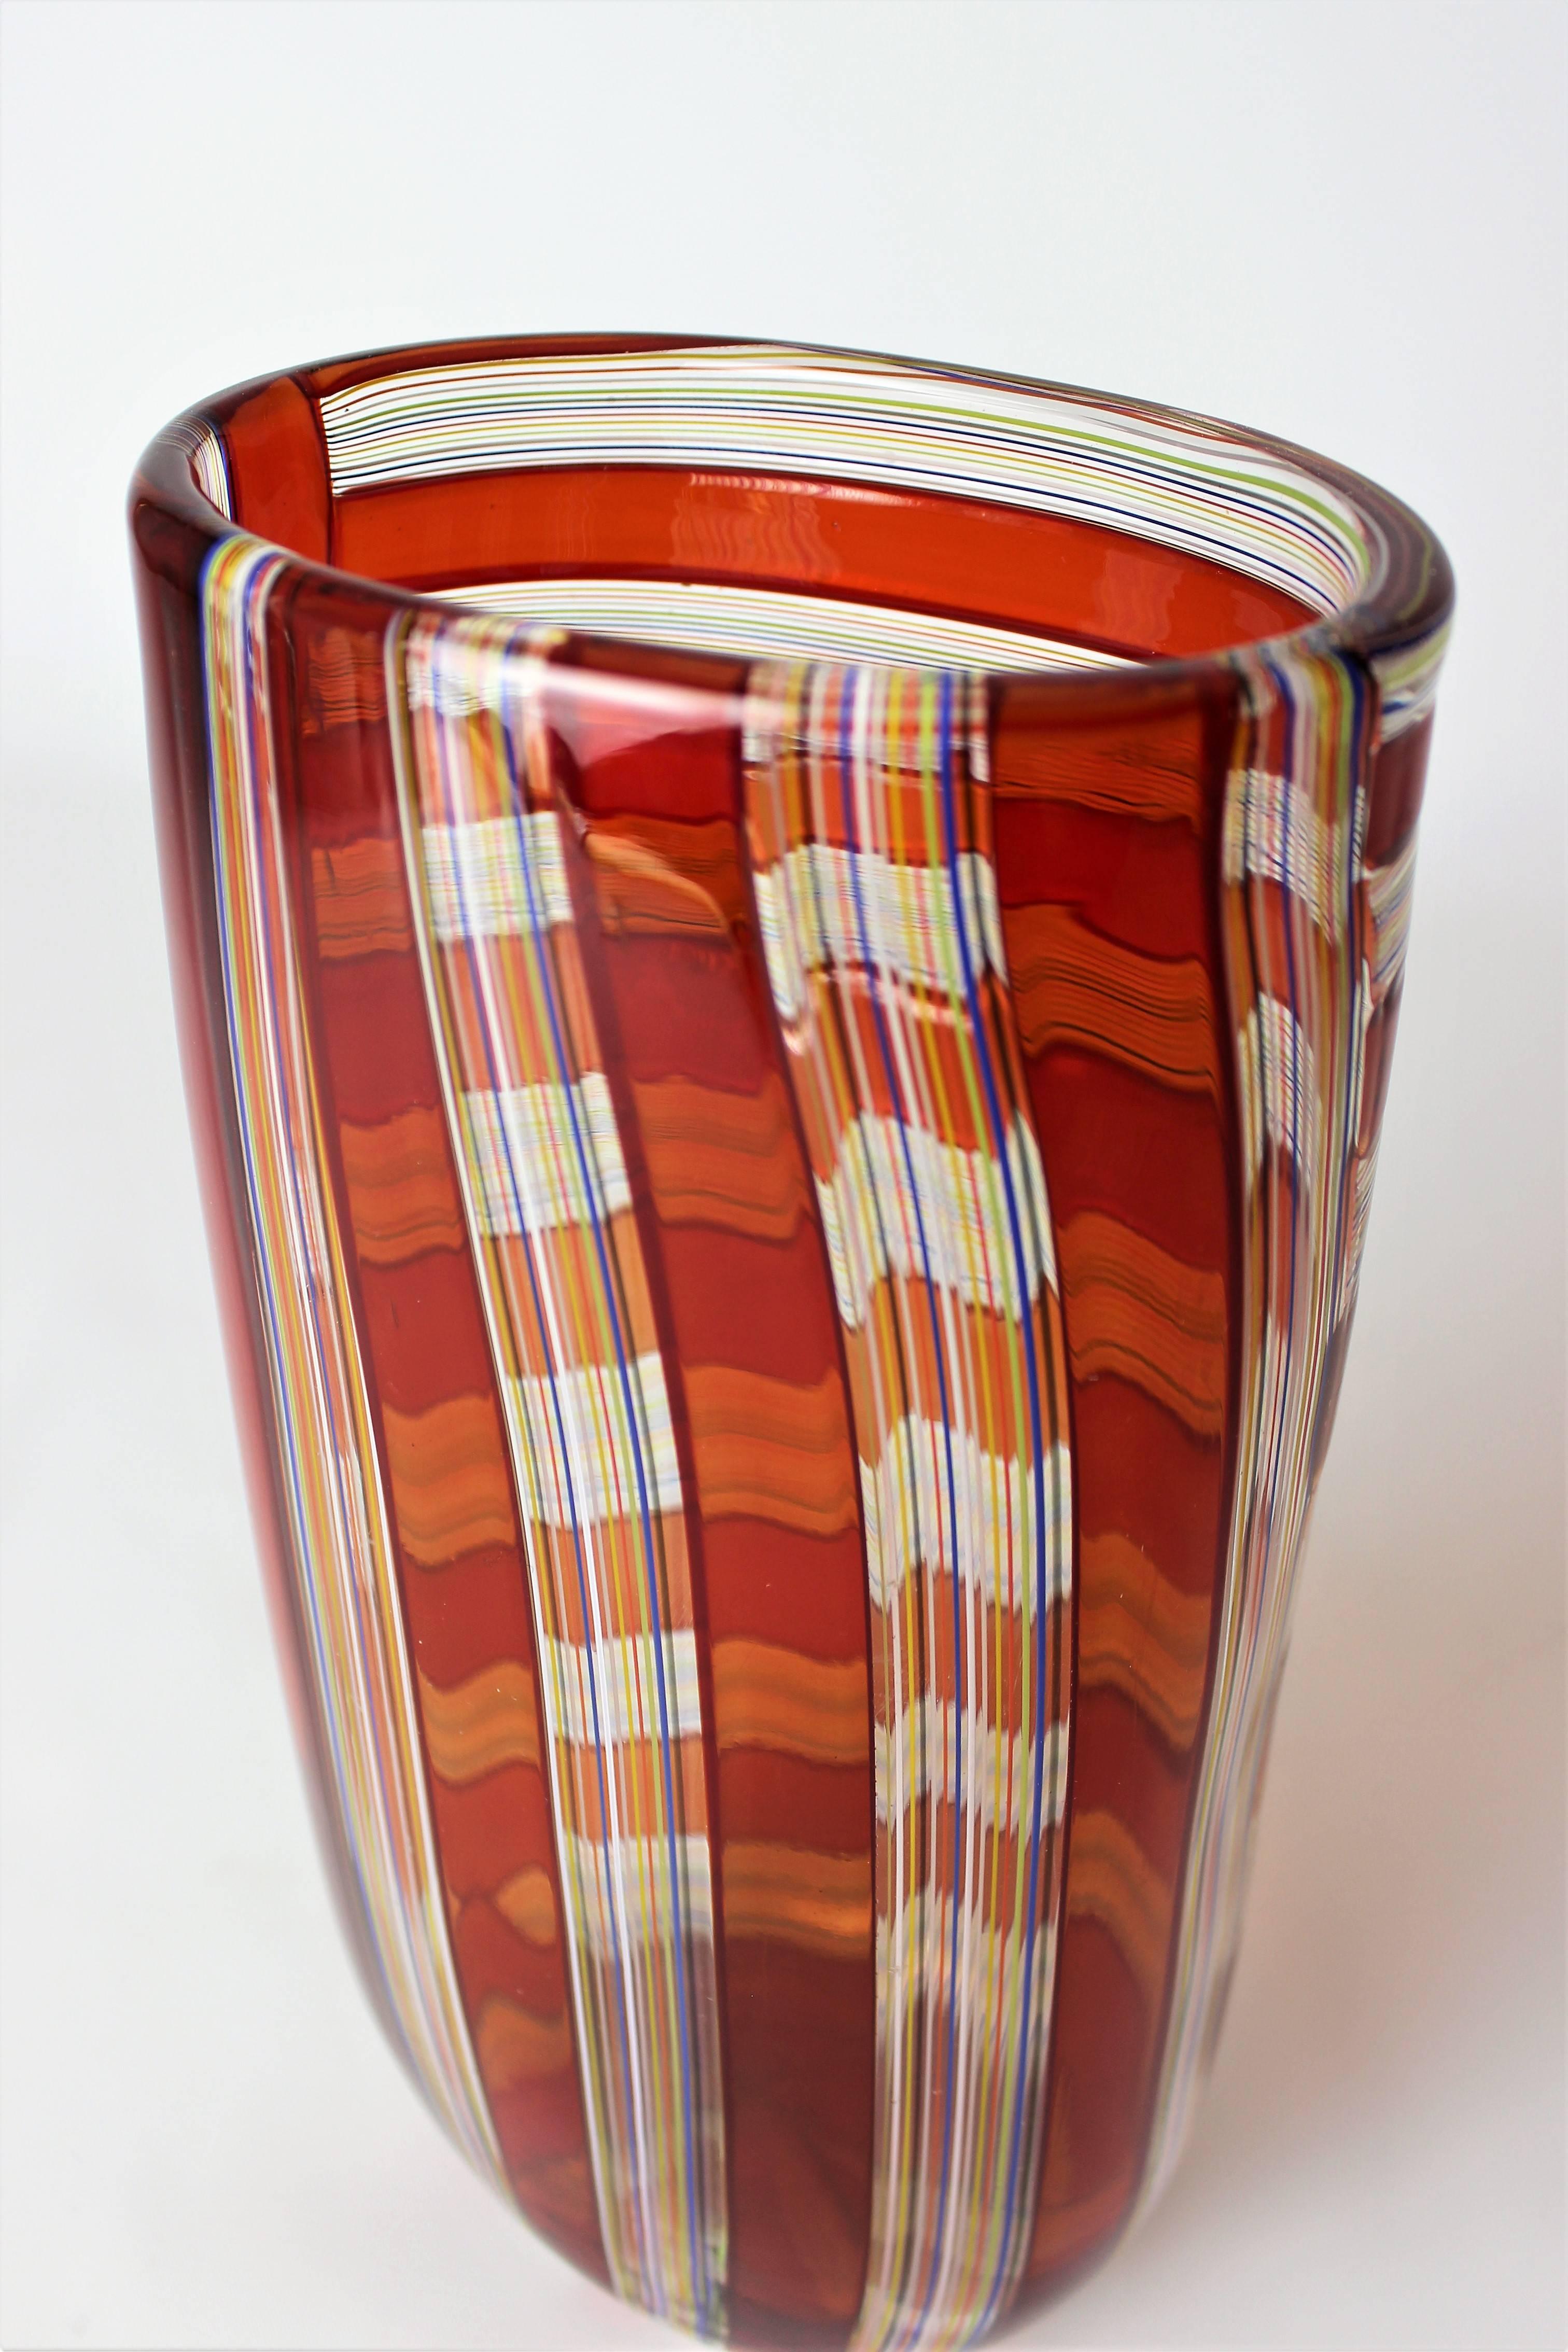 Large blown caned glass vase by Robin Mix for Tiffany & Co. In the style of Bianconi for Venini, Murano, Italy.

About Robin Mix
Robin Mix was first introduced to glassblowing at the University of Massachusetts in the early 1970s. The challenges